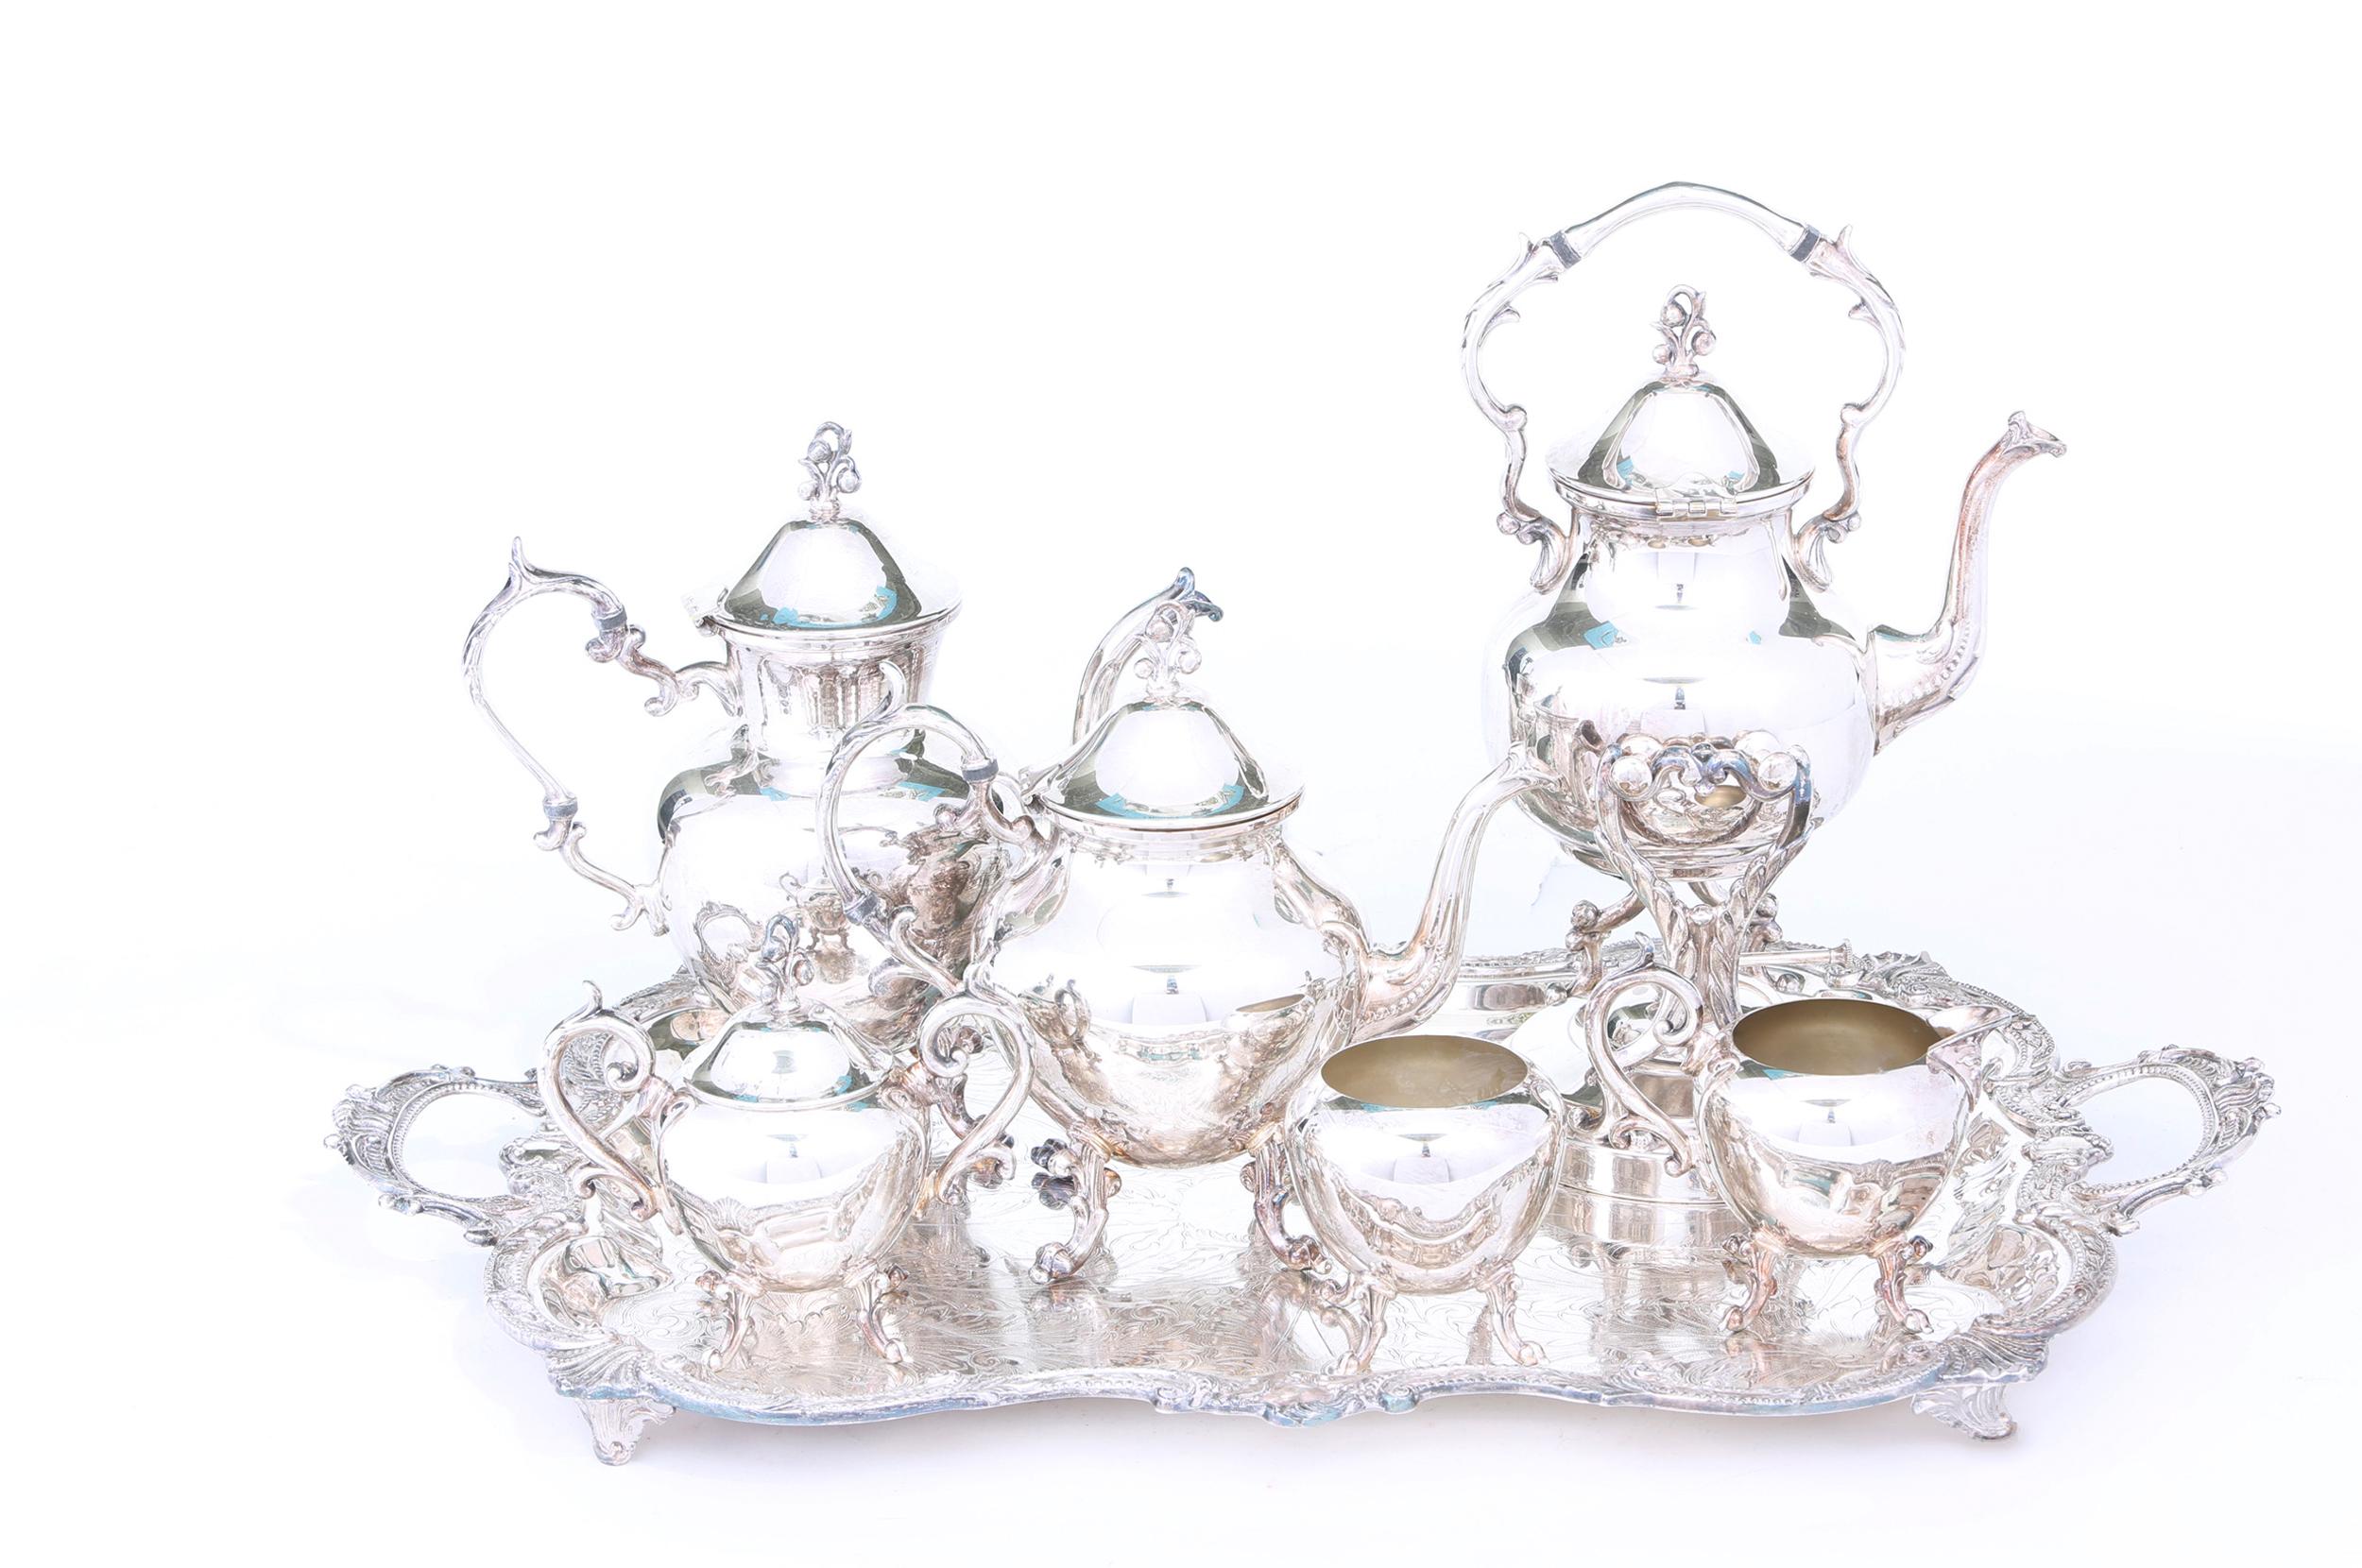 Beautiful English silver plated seven-piece tea or coffee service with exterior design details. Maker's mark undersigned. The tea or coffee service is in great vintage condition. Measures: Coffee pot is 12